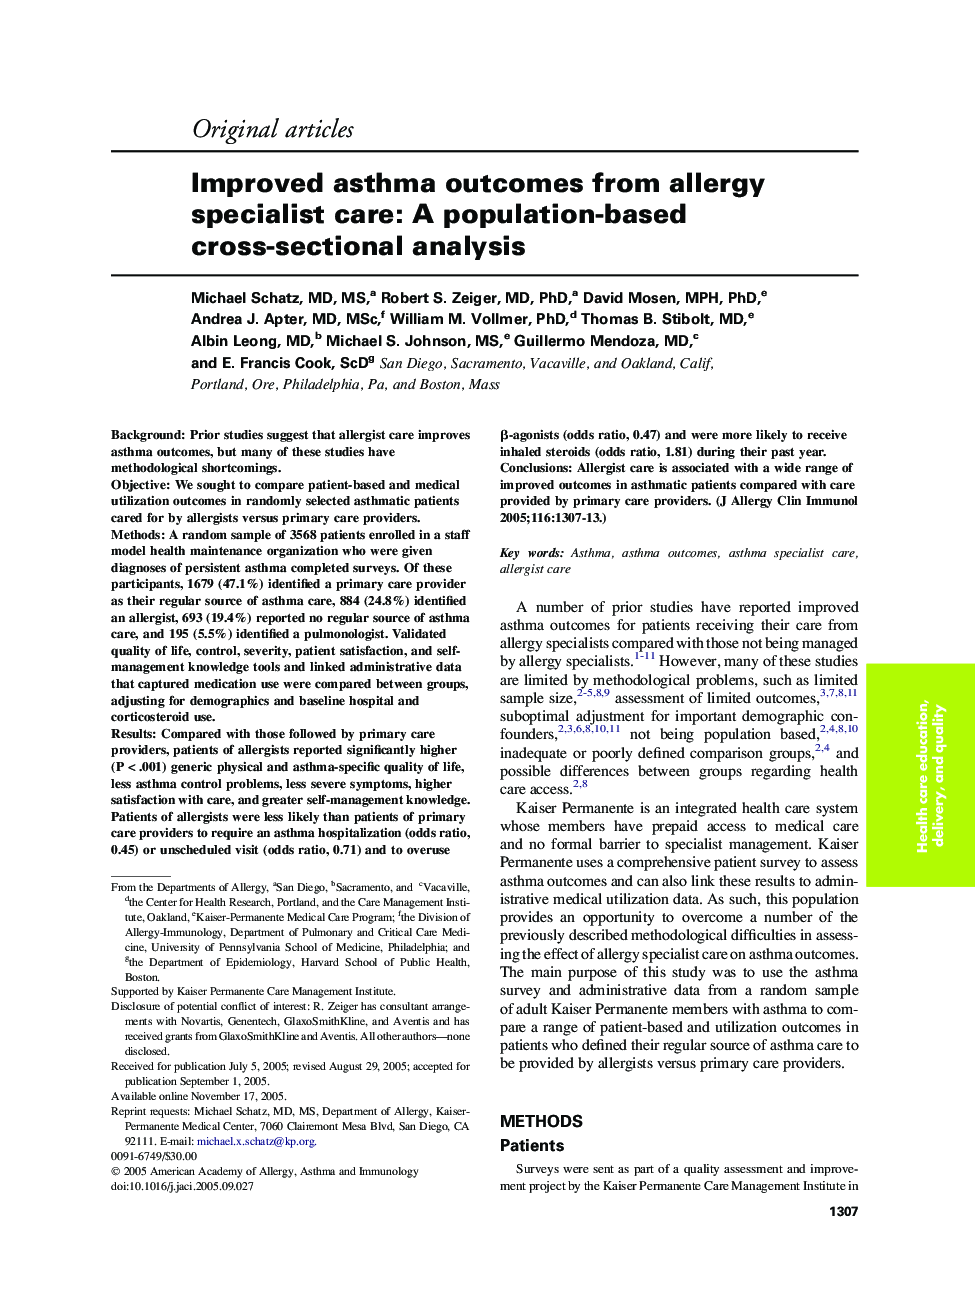 Improved asthma outcomes from allergy specialist care: A population-based cross-sectional analysis